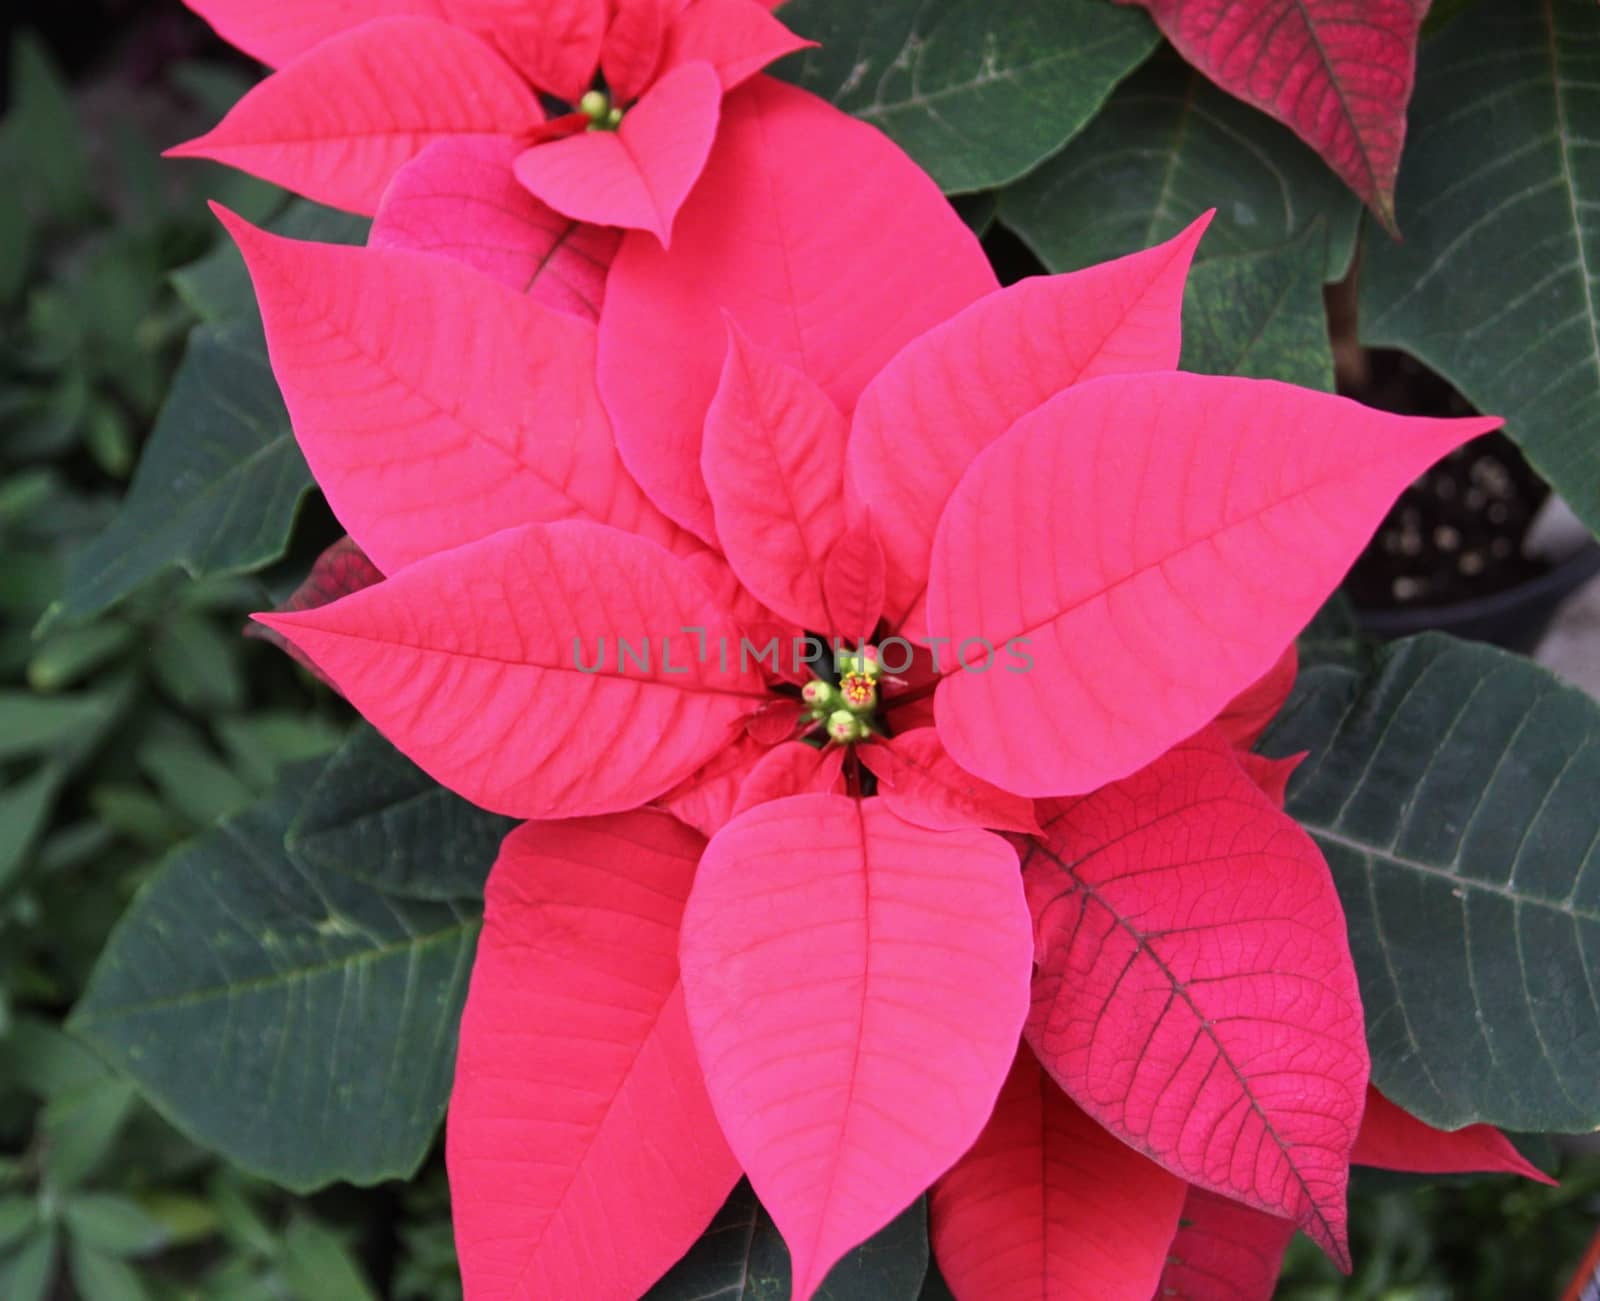 beautiful red poinsettia and green leaves